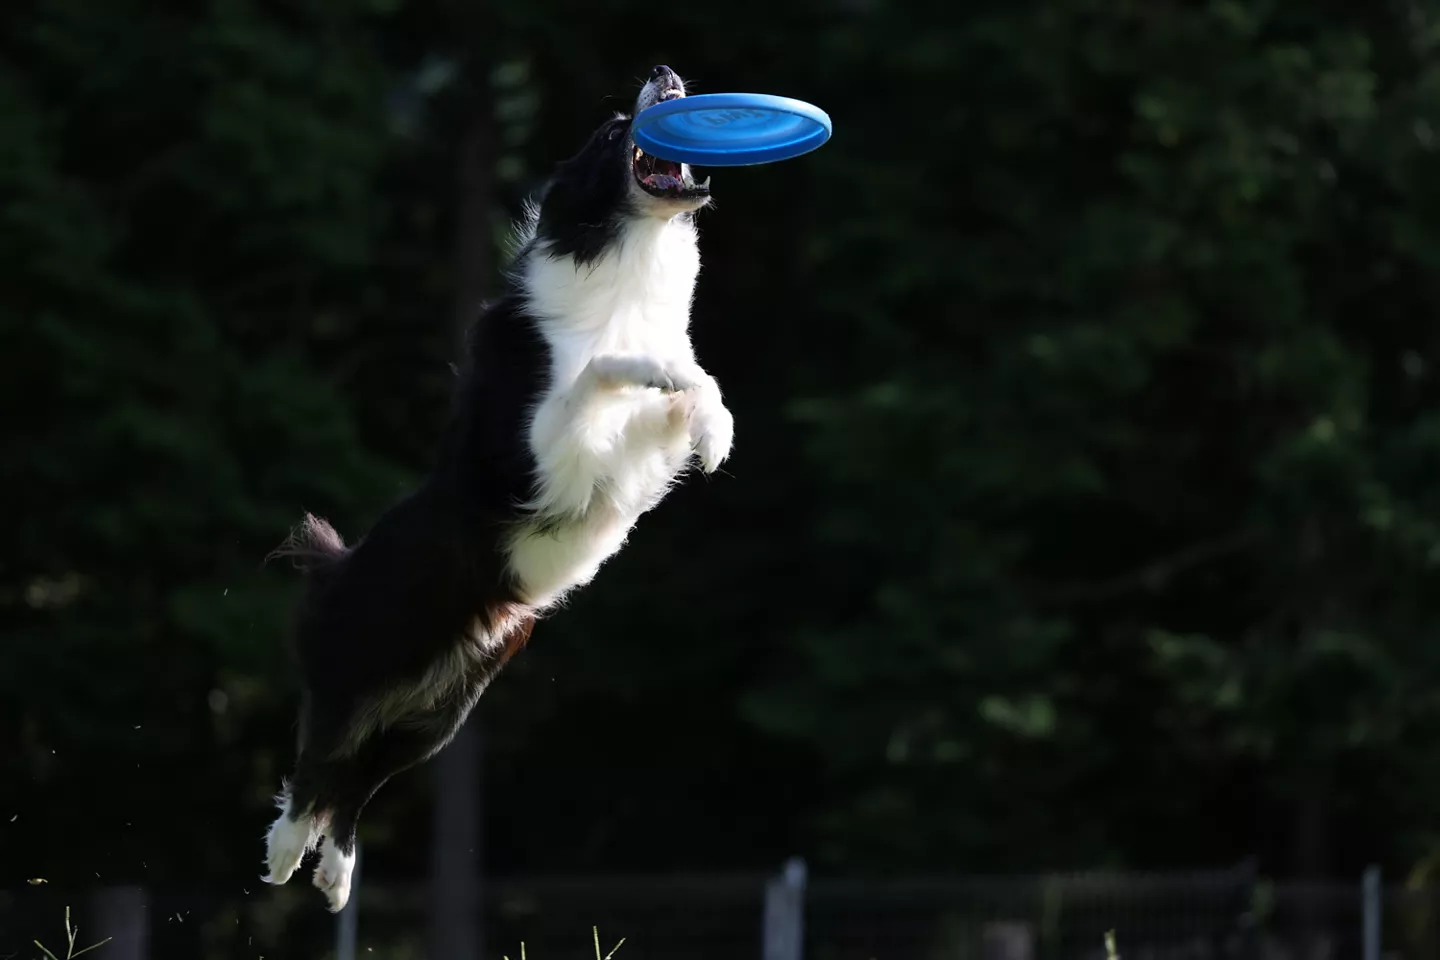 Dog Catching Frisbee in the Air